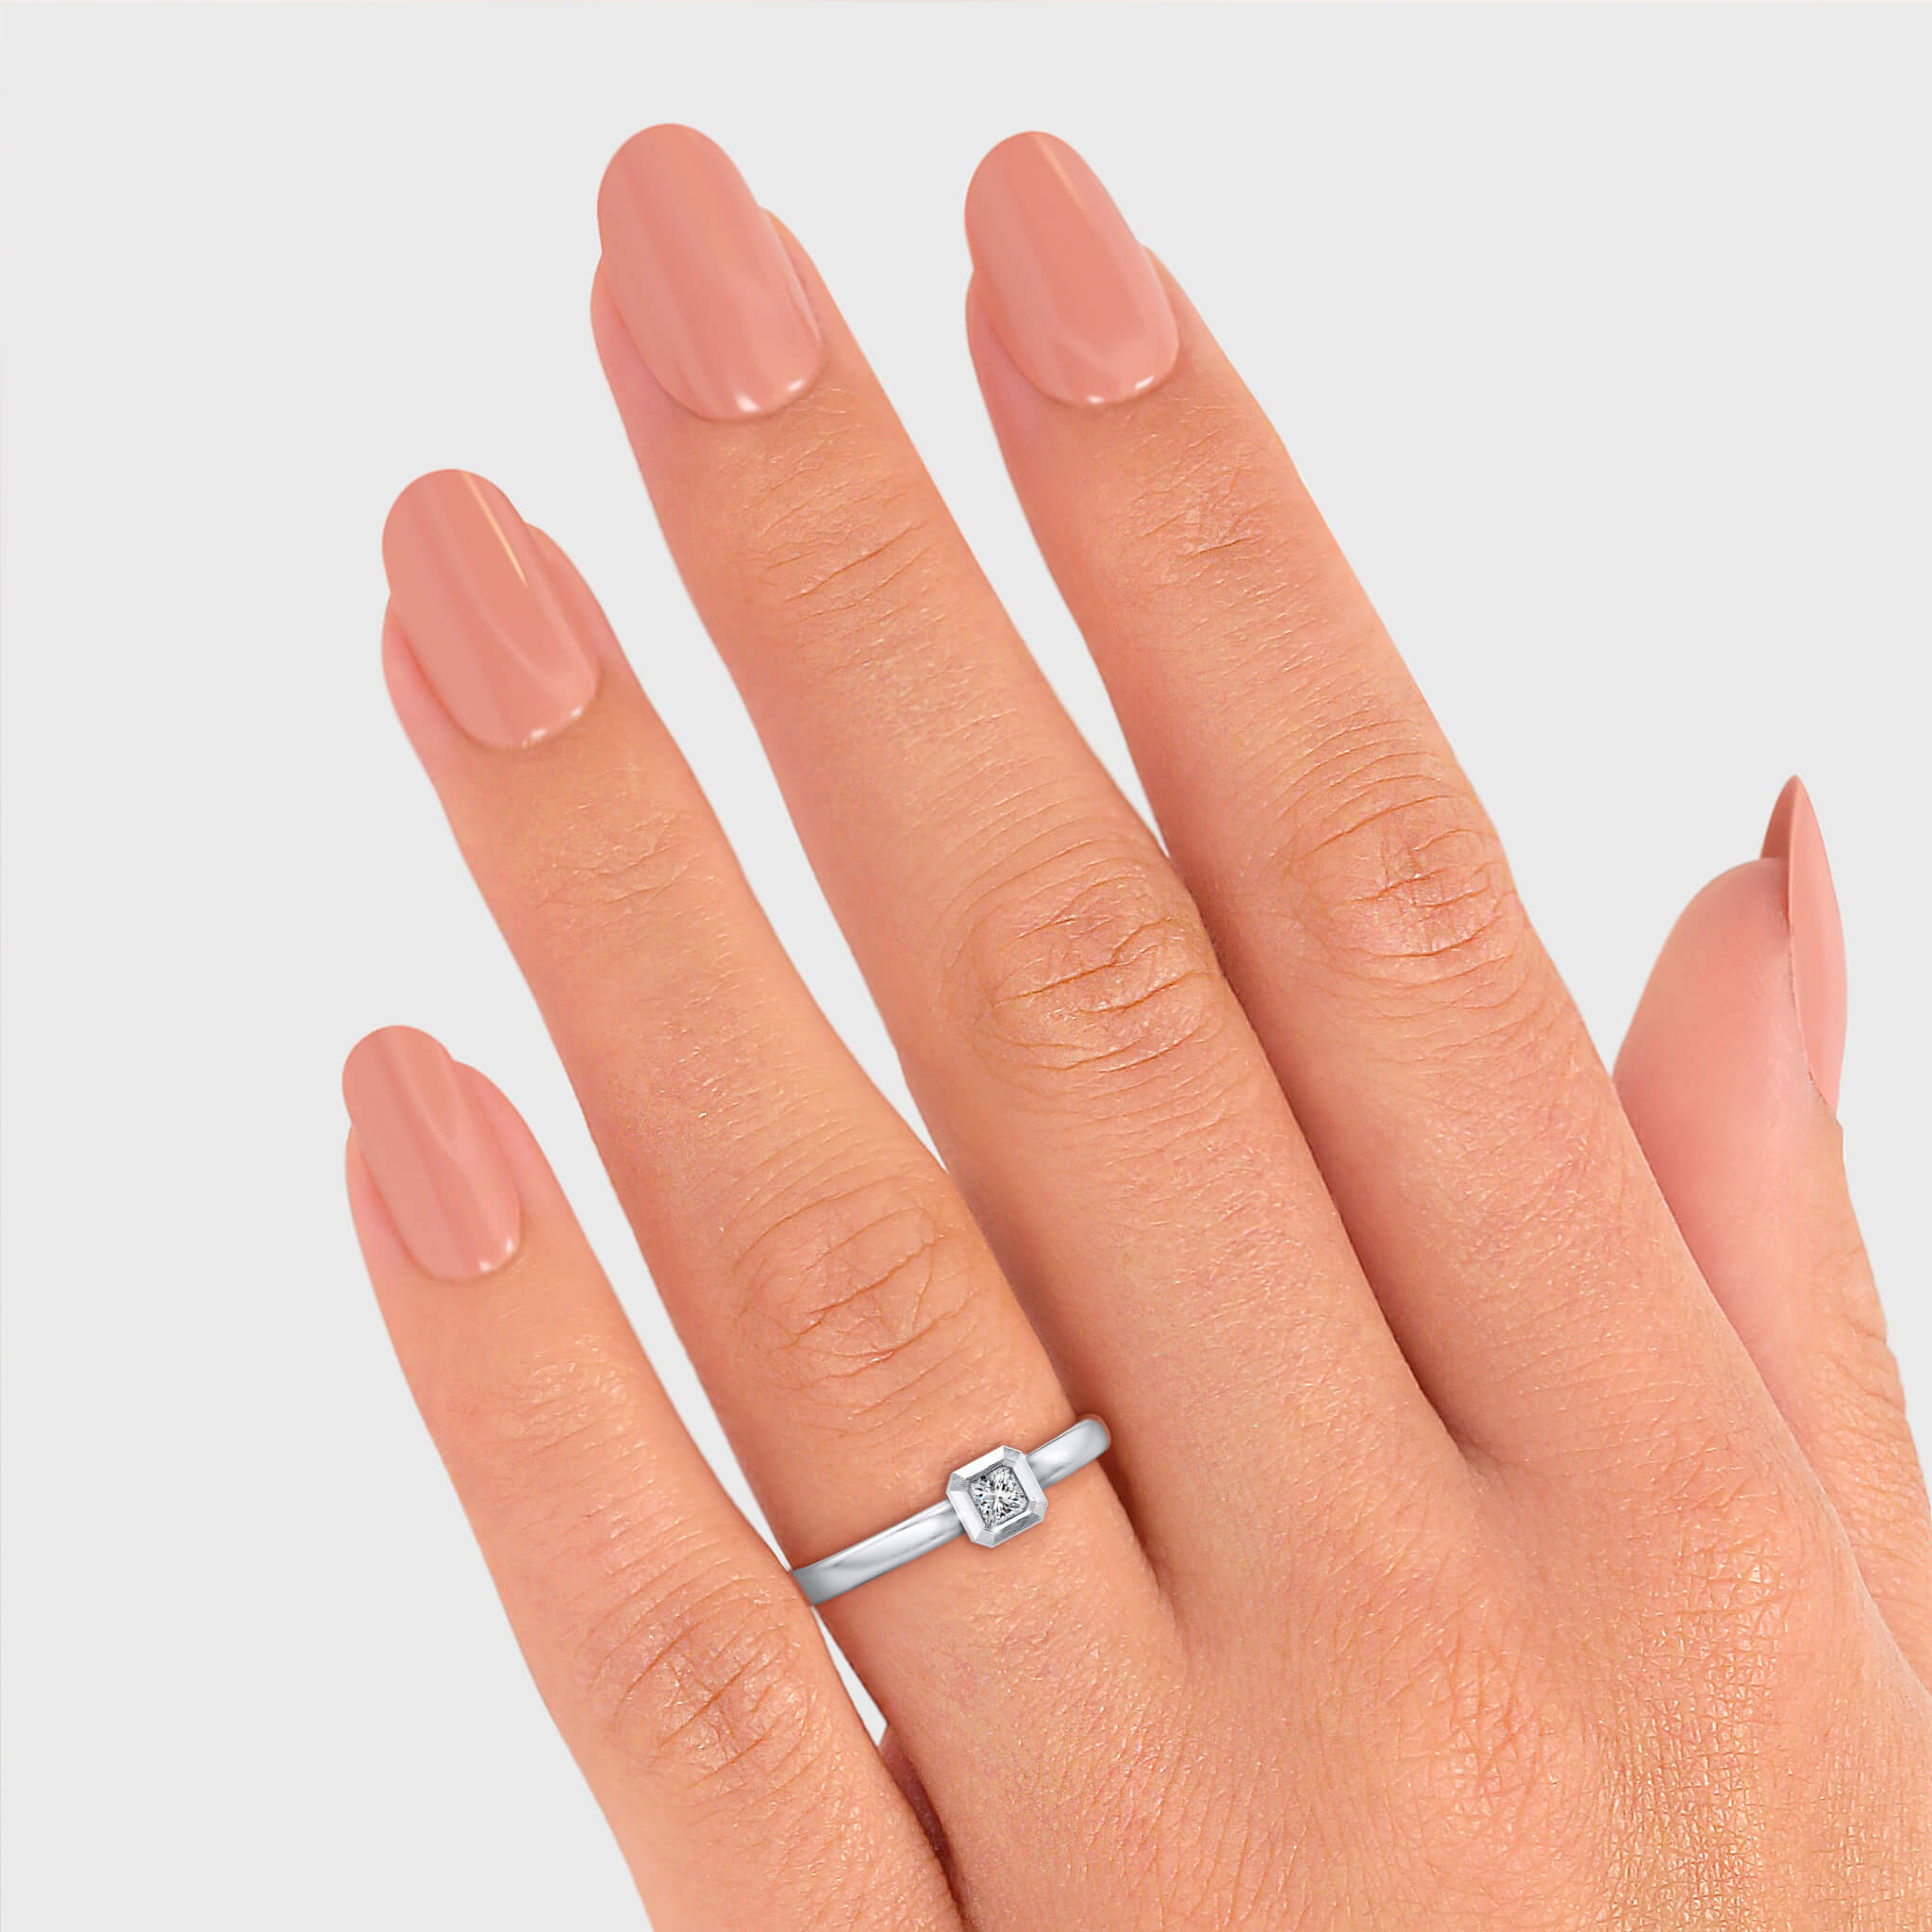 Shimansky - Women Wearing the My Girl Diamond Tube Set Solitaire Ring 0.15ct Crafted in Brushed 18K White Gold